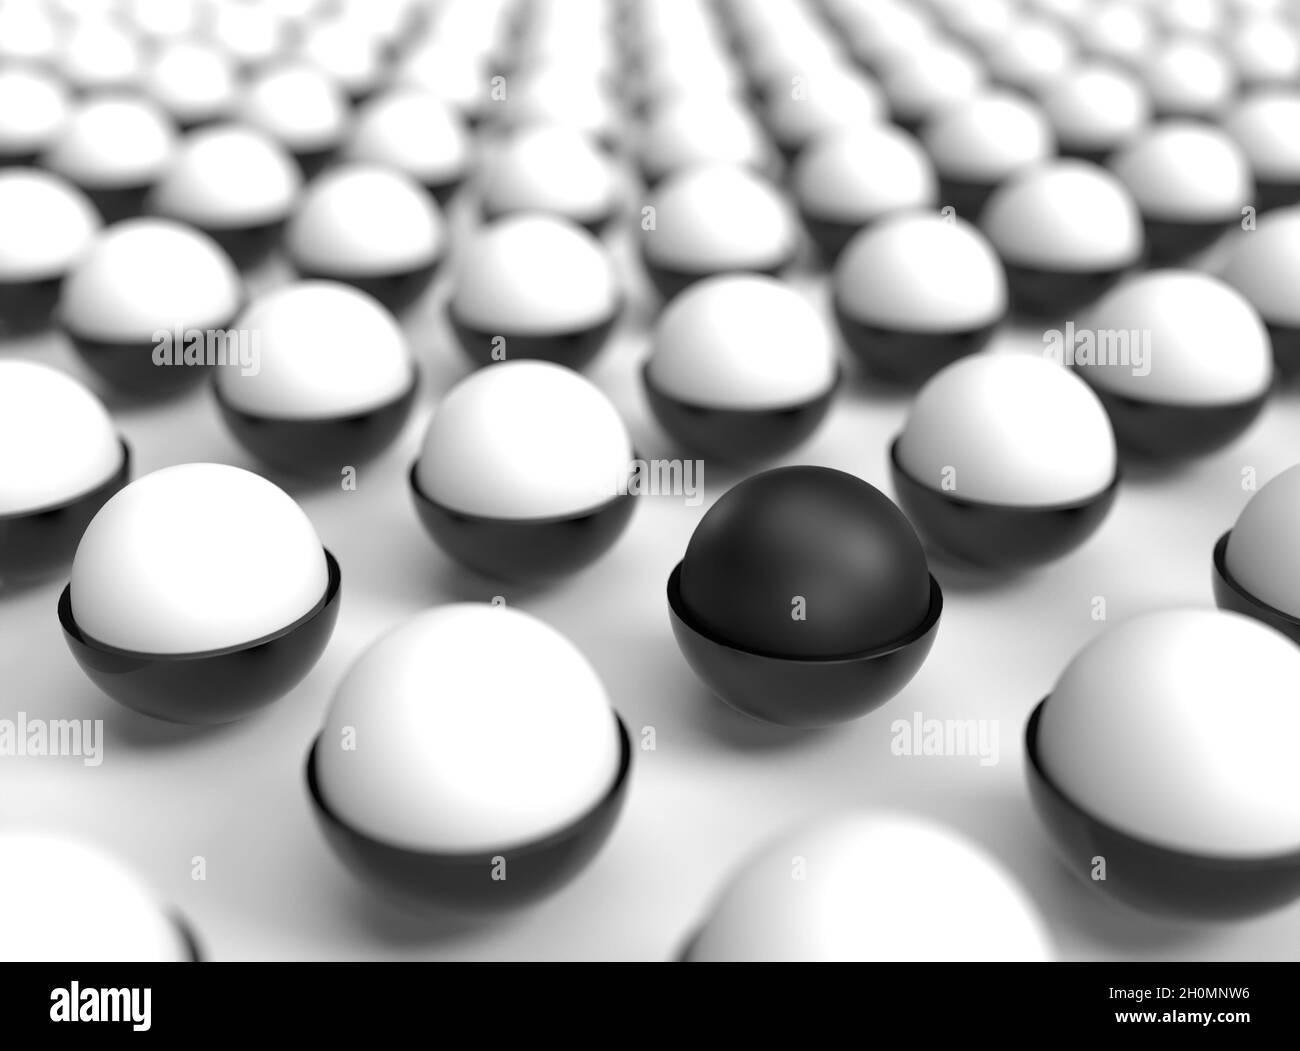 A single black ball in a field of white balls Stock Photo